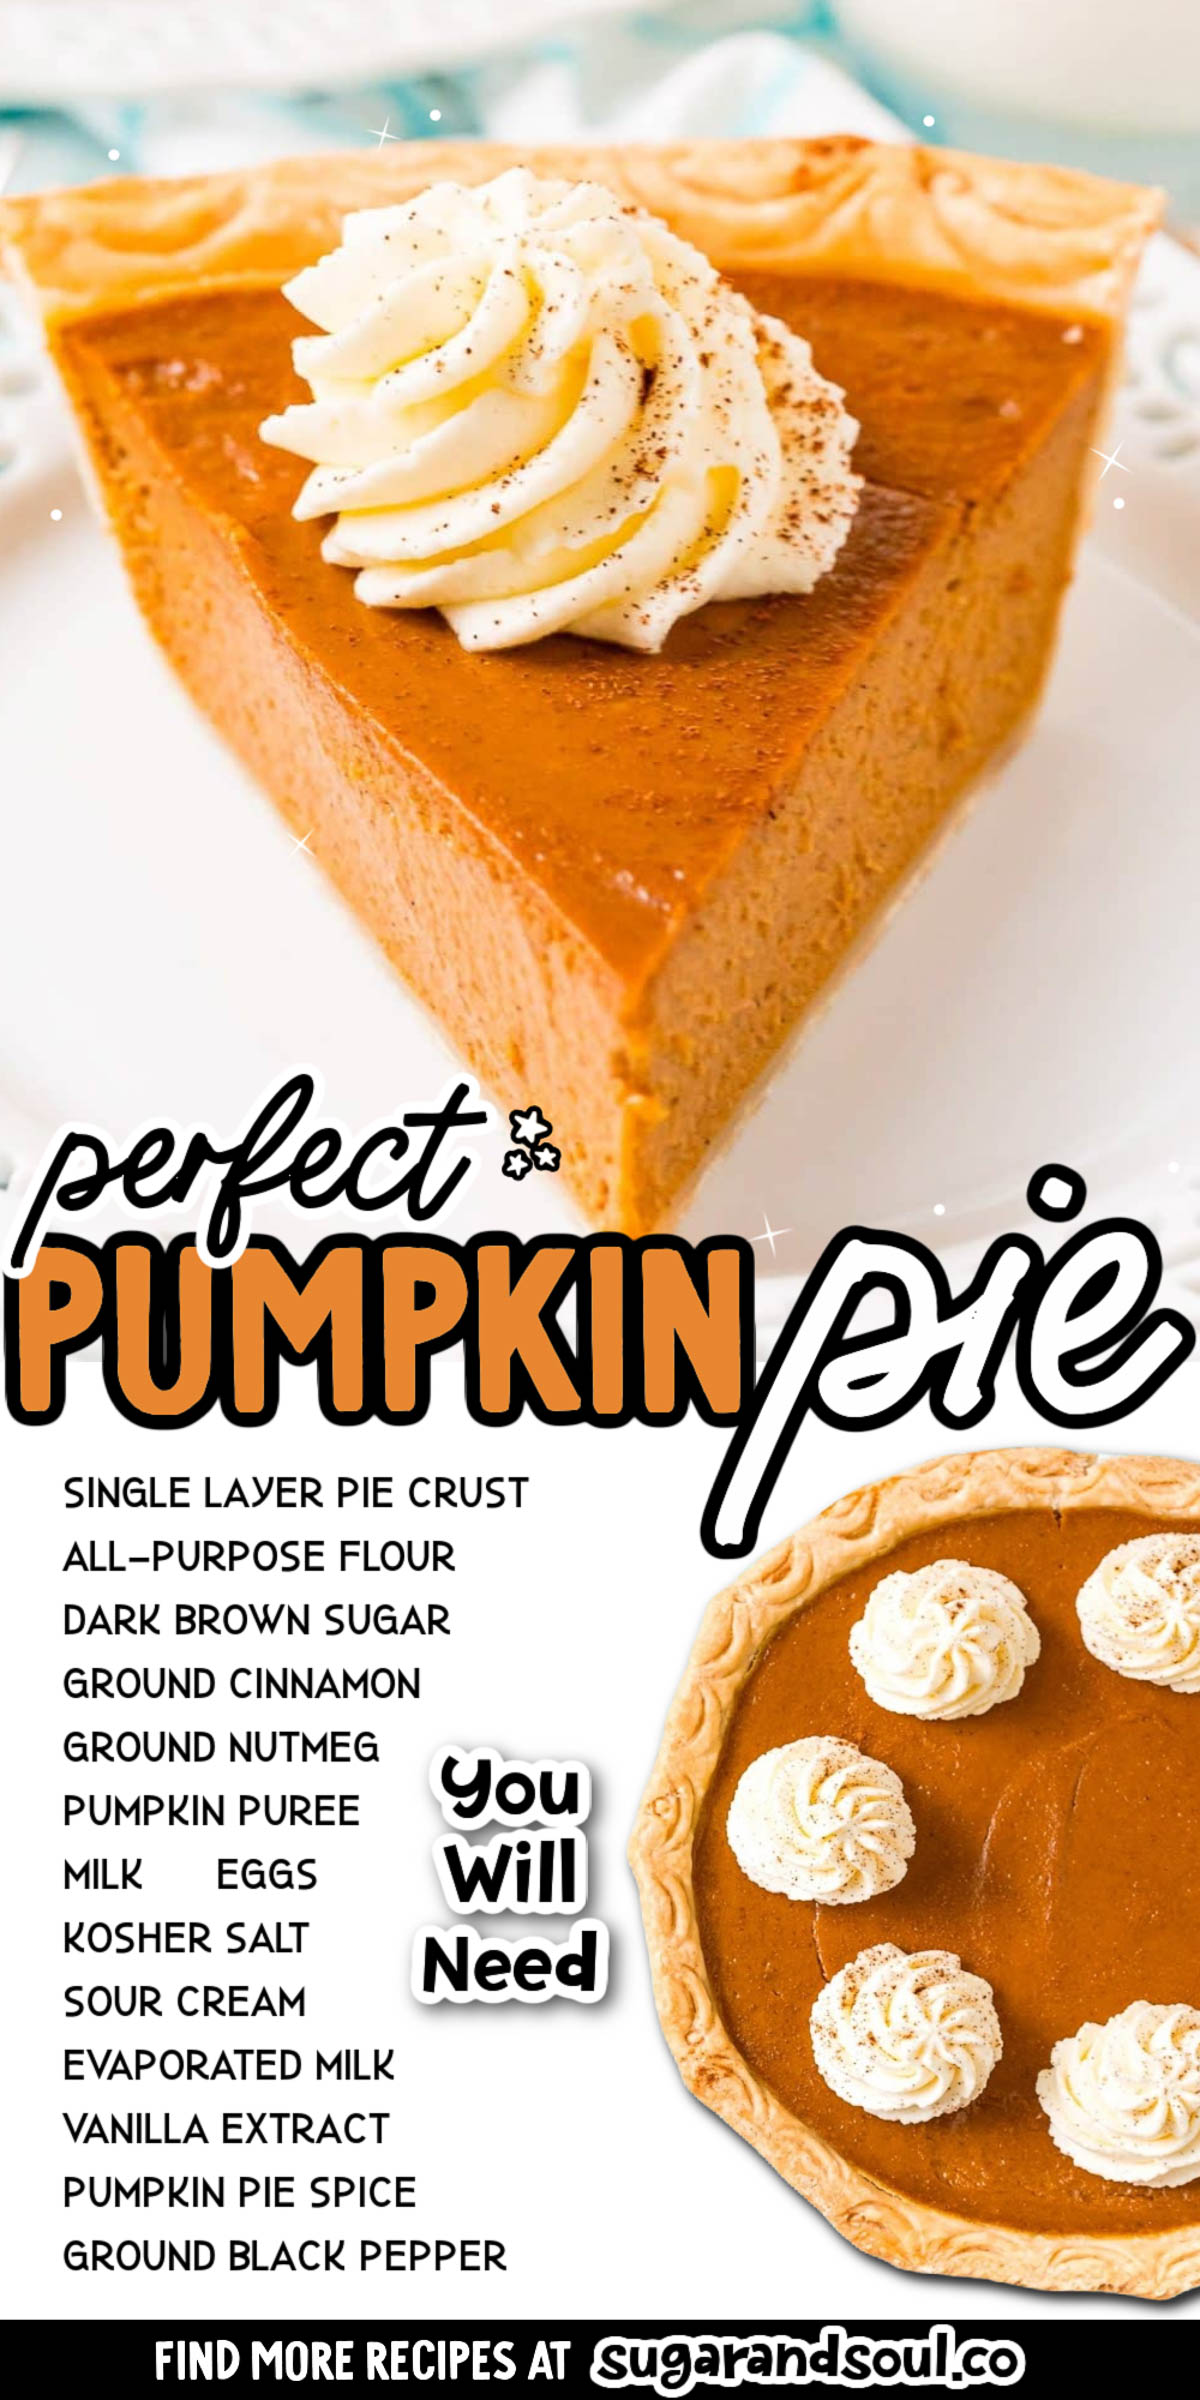 This Pumpkin Pie Recipe is perfect for fall and Thanksgiving! A smooth and creamy spiced pumpkin custard filling baked in a flaky pie crust. via @sugarandsoulco